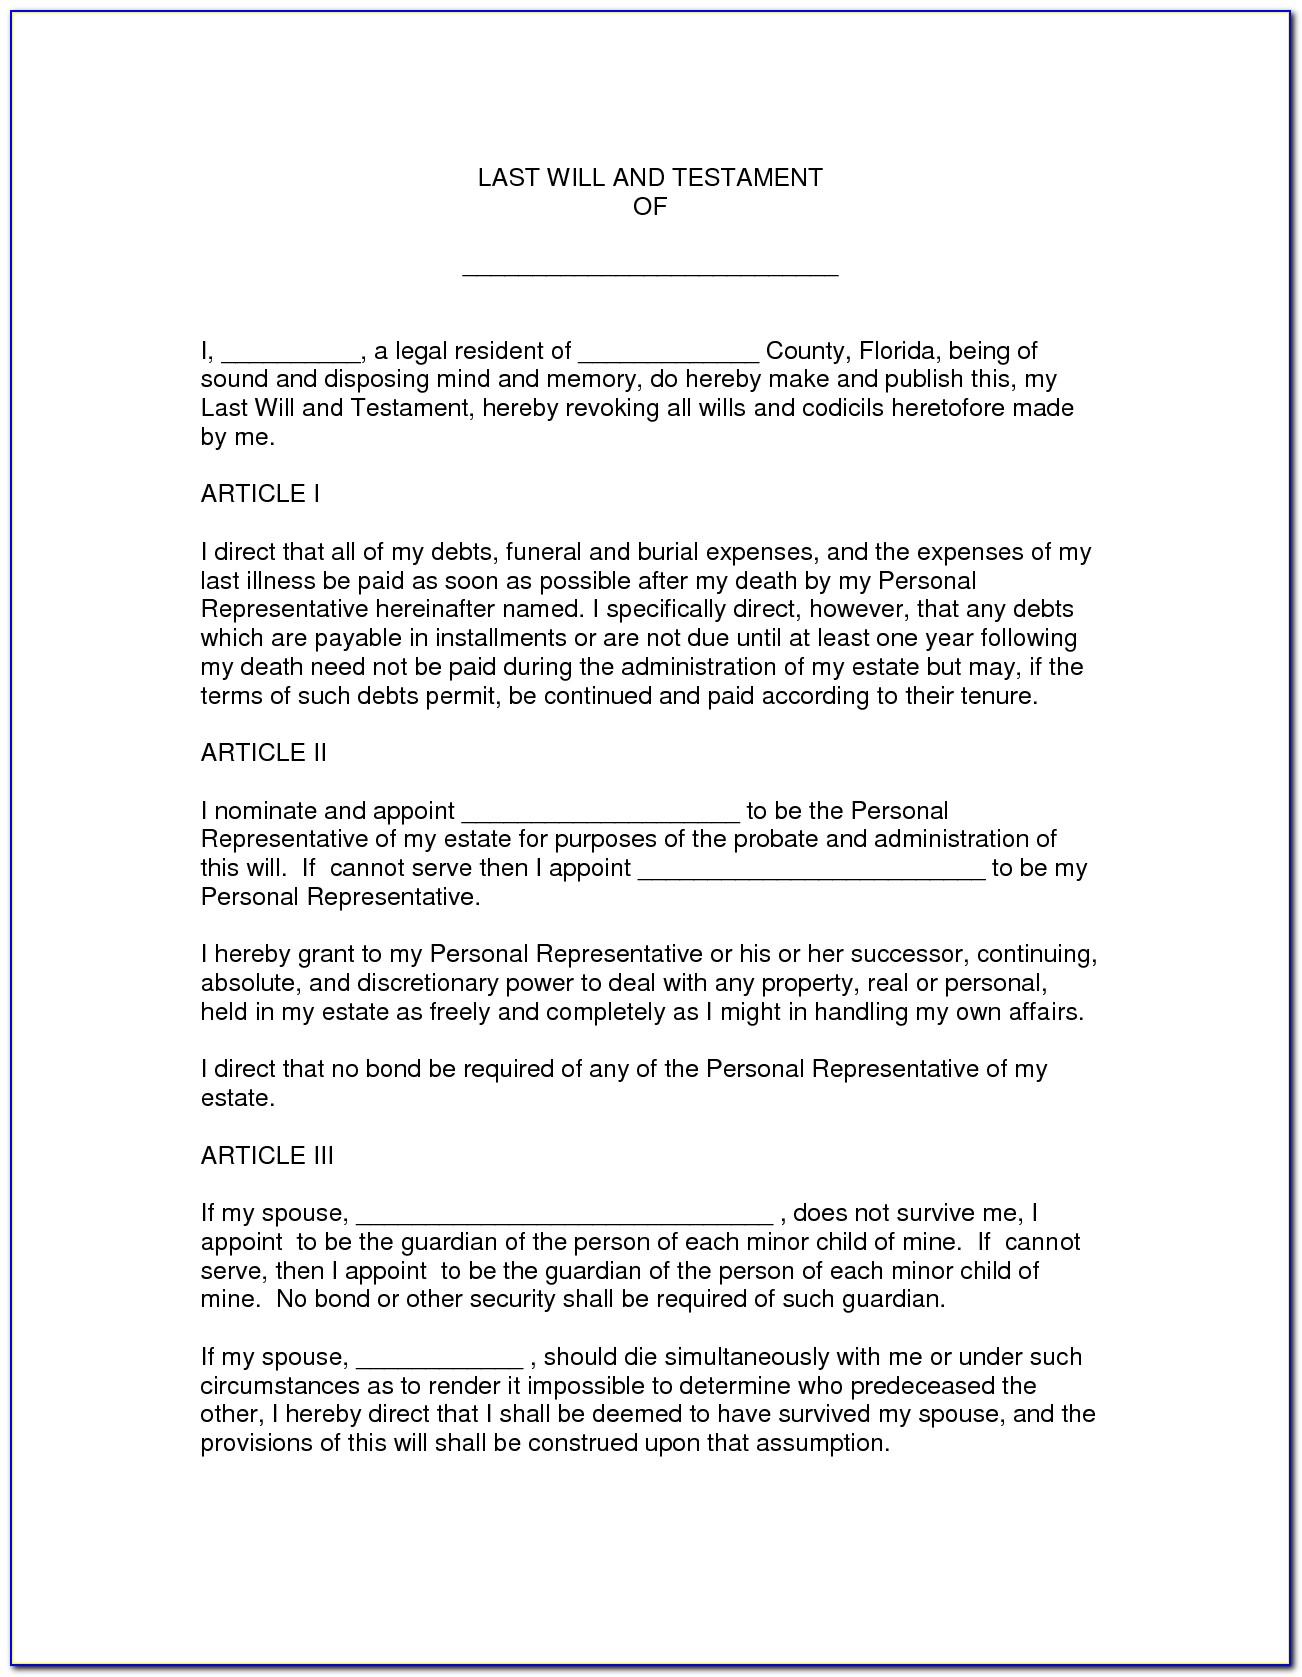 25 Images Of Florida Last Will Document Template | Crazybiker - Free Printable Florida Last Will And Testament Form